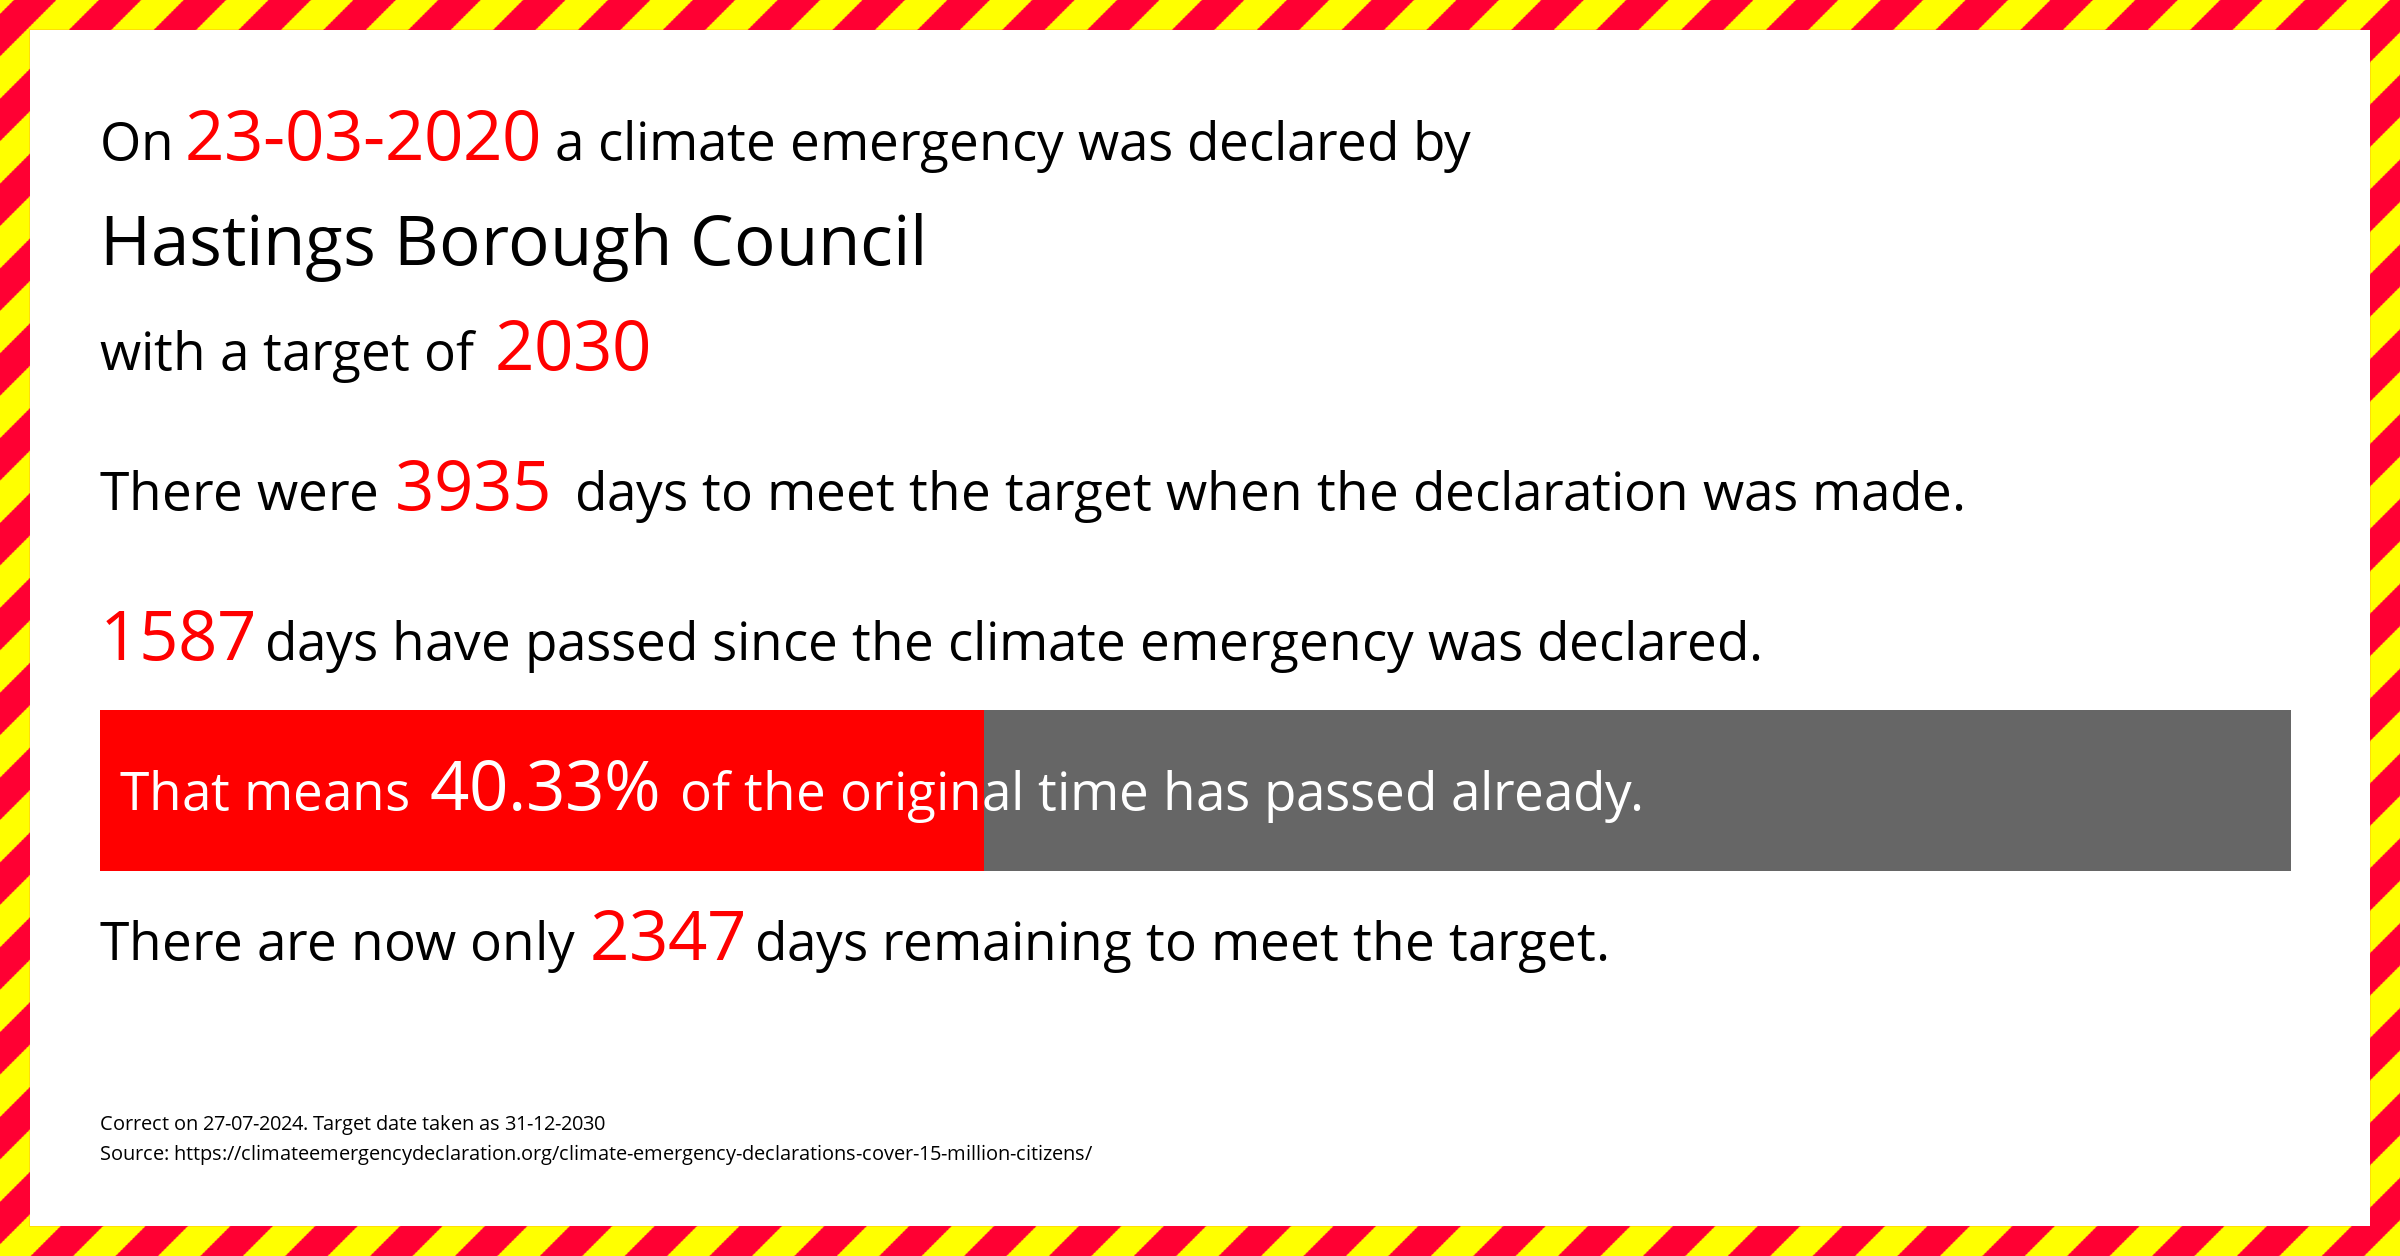 Hastings Borough Council  declared a Climate emergency on Monday 23rd March 2020, with a target of 2030.